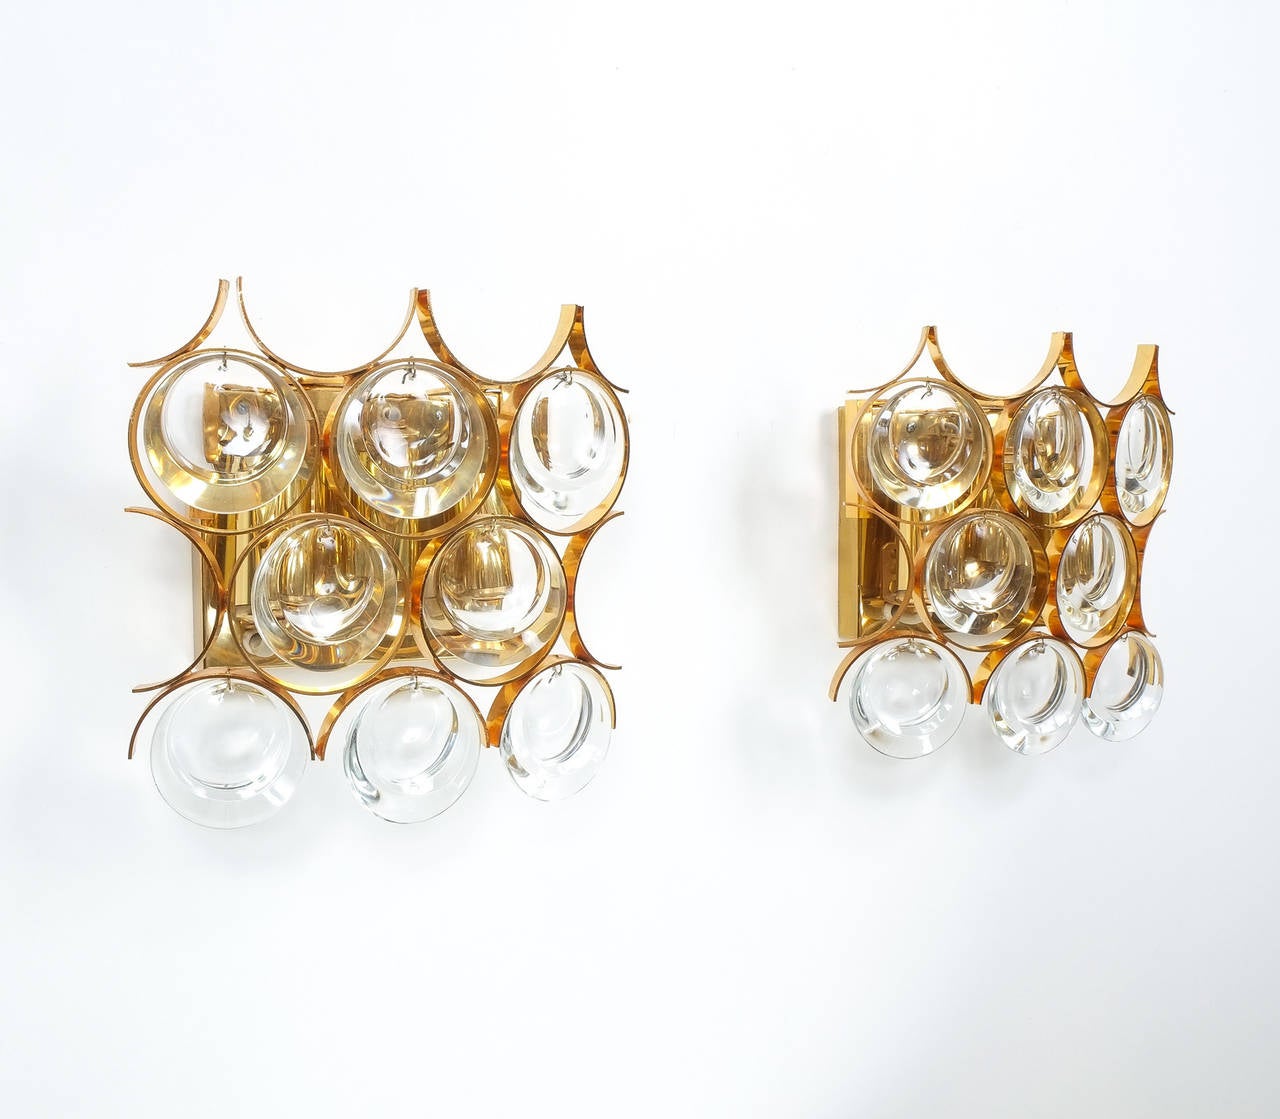 Beautiful pair of gilded brass and glass sconces by Palwa from the 1960s.
They are in excellent condition and have been professionally cleaned and rewired. They hold up to three bulbs each. Priced as a pair.

